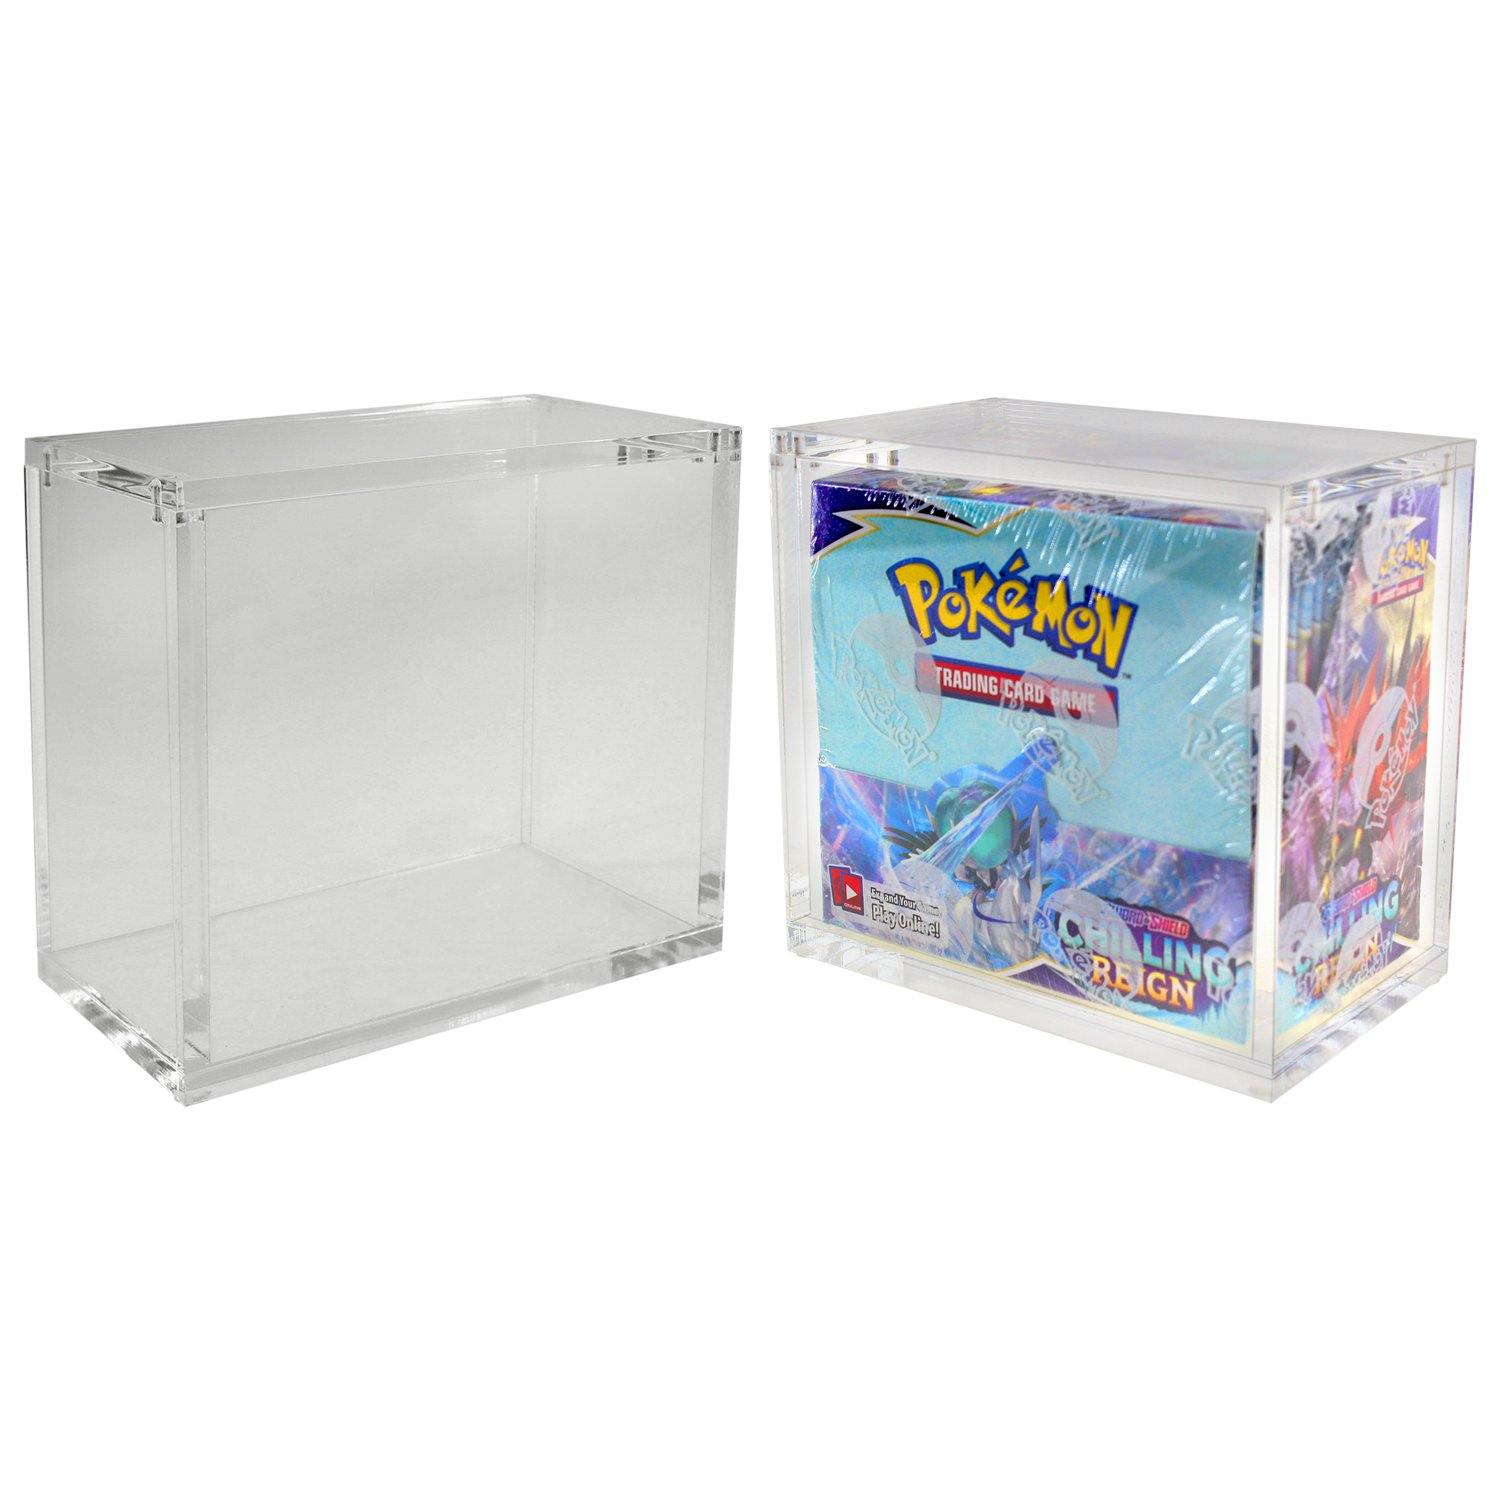 Acrylic Case for Pokemon Booster Box (8mm thick) - Wholesale